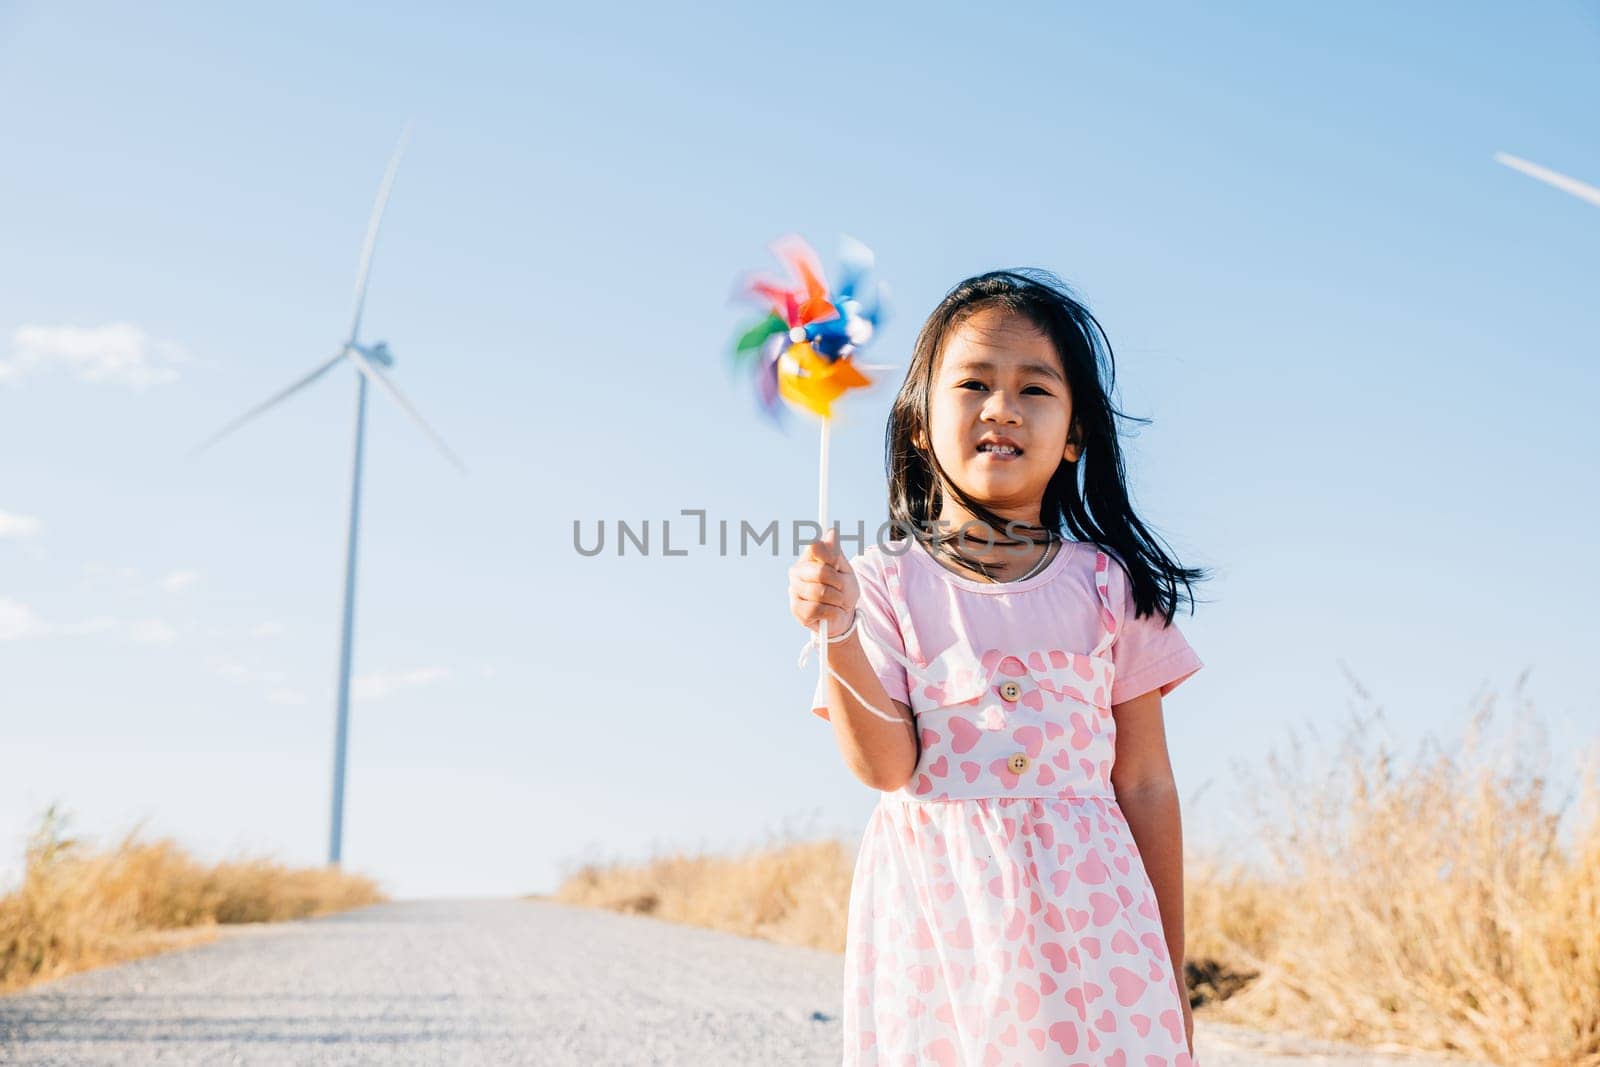 A joyful little girl smiling and running with pinwheels near windmills. Embracing clean energy through playful education in a picturesque wind turbine setting under a beautiful sky.